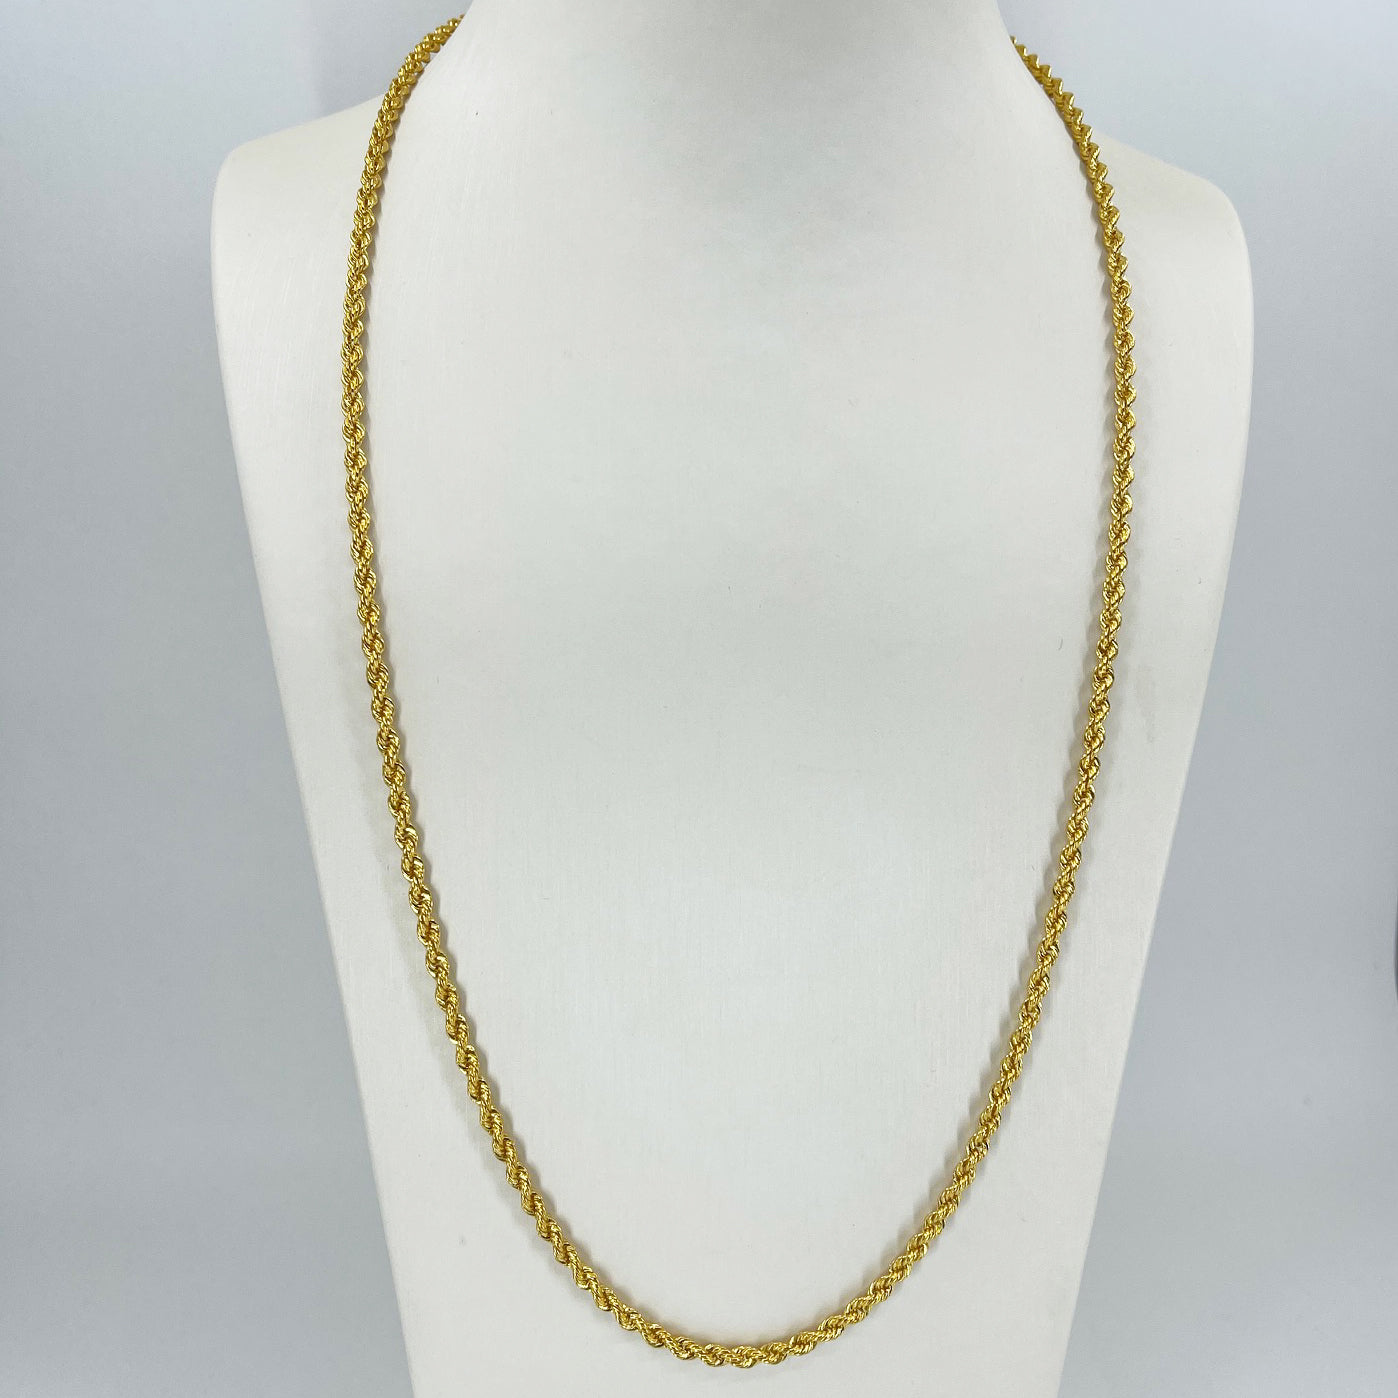 24K Solid Yellow Gold Rope Chain 39.2 Grams 24